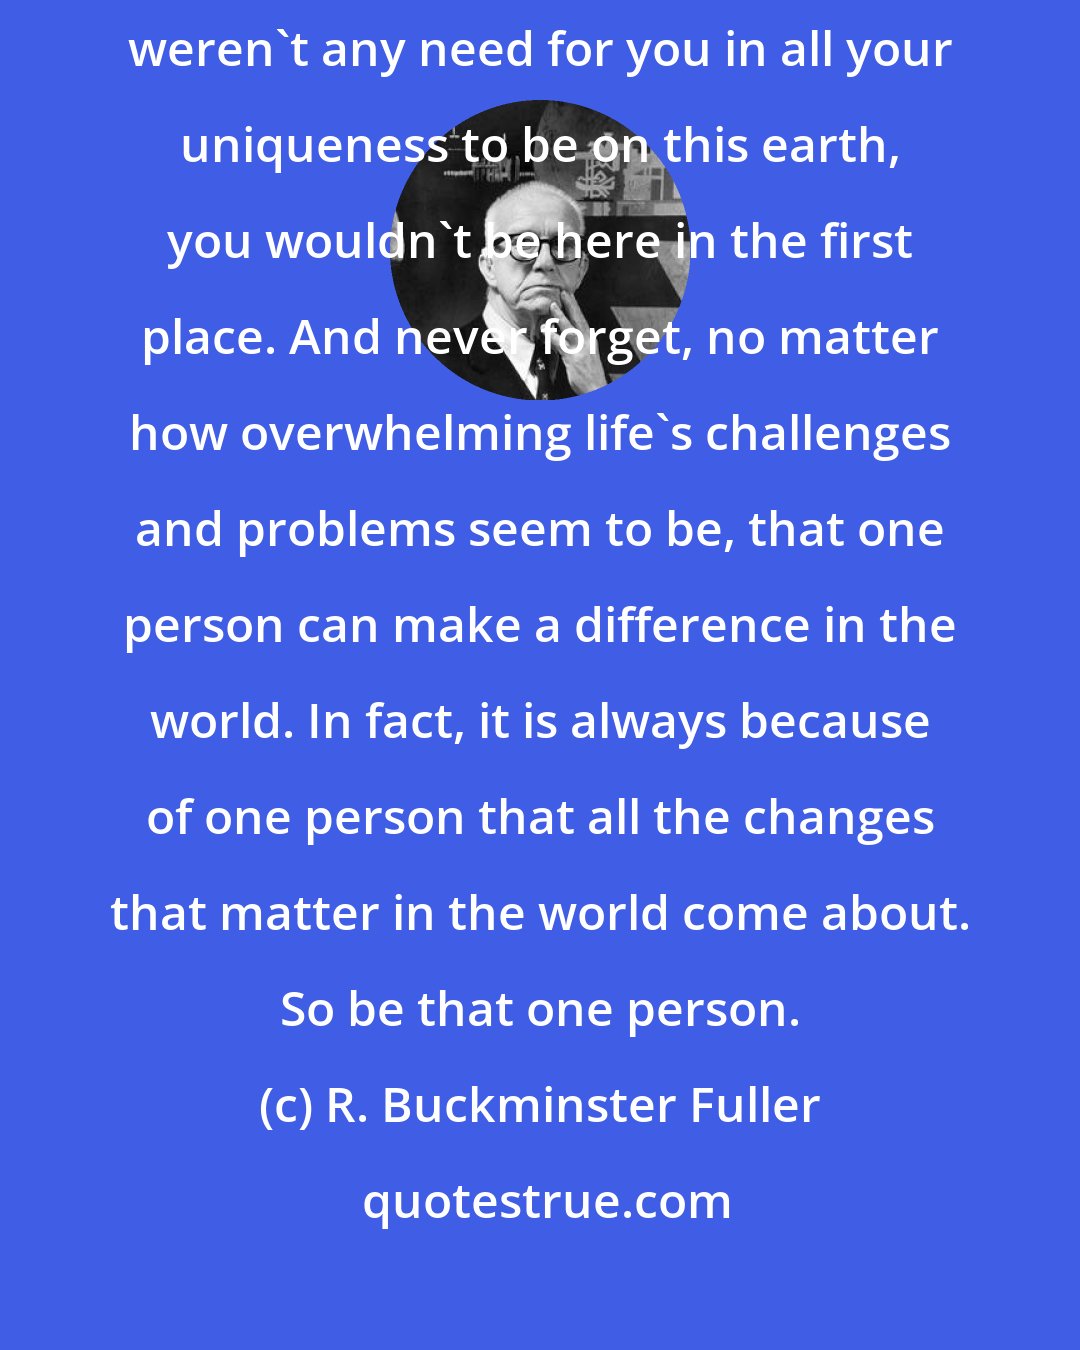 R. Buckminster Fuller: Never forget that you are one of a kind. Never forget that if there weren't any need for you in all your uniqueness to be on this earth, you wouldn't be here in the first place. And never forget, no matter how overwhelming life's challenges and problems seem to be, that one person can make a difference in the world. In fact, it is always because of one person that all the changes that matter in the world come about. So be that one person.